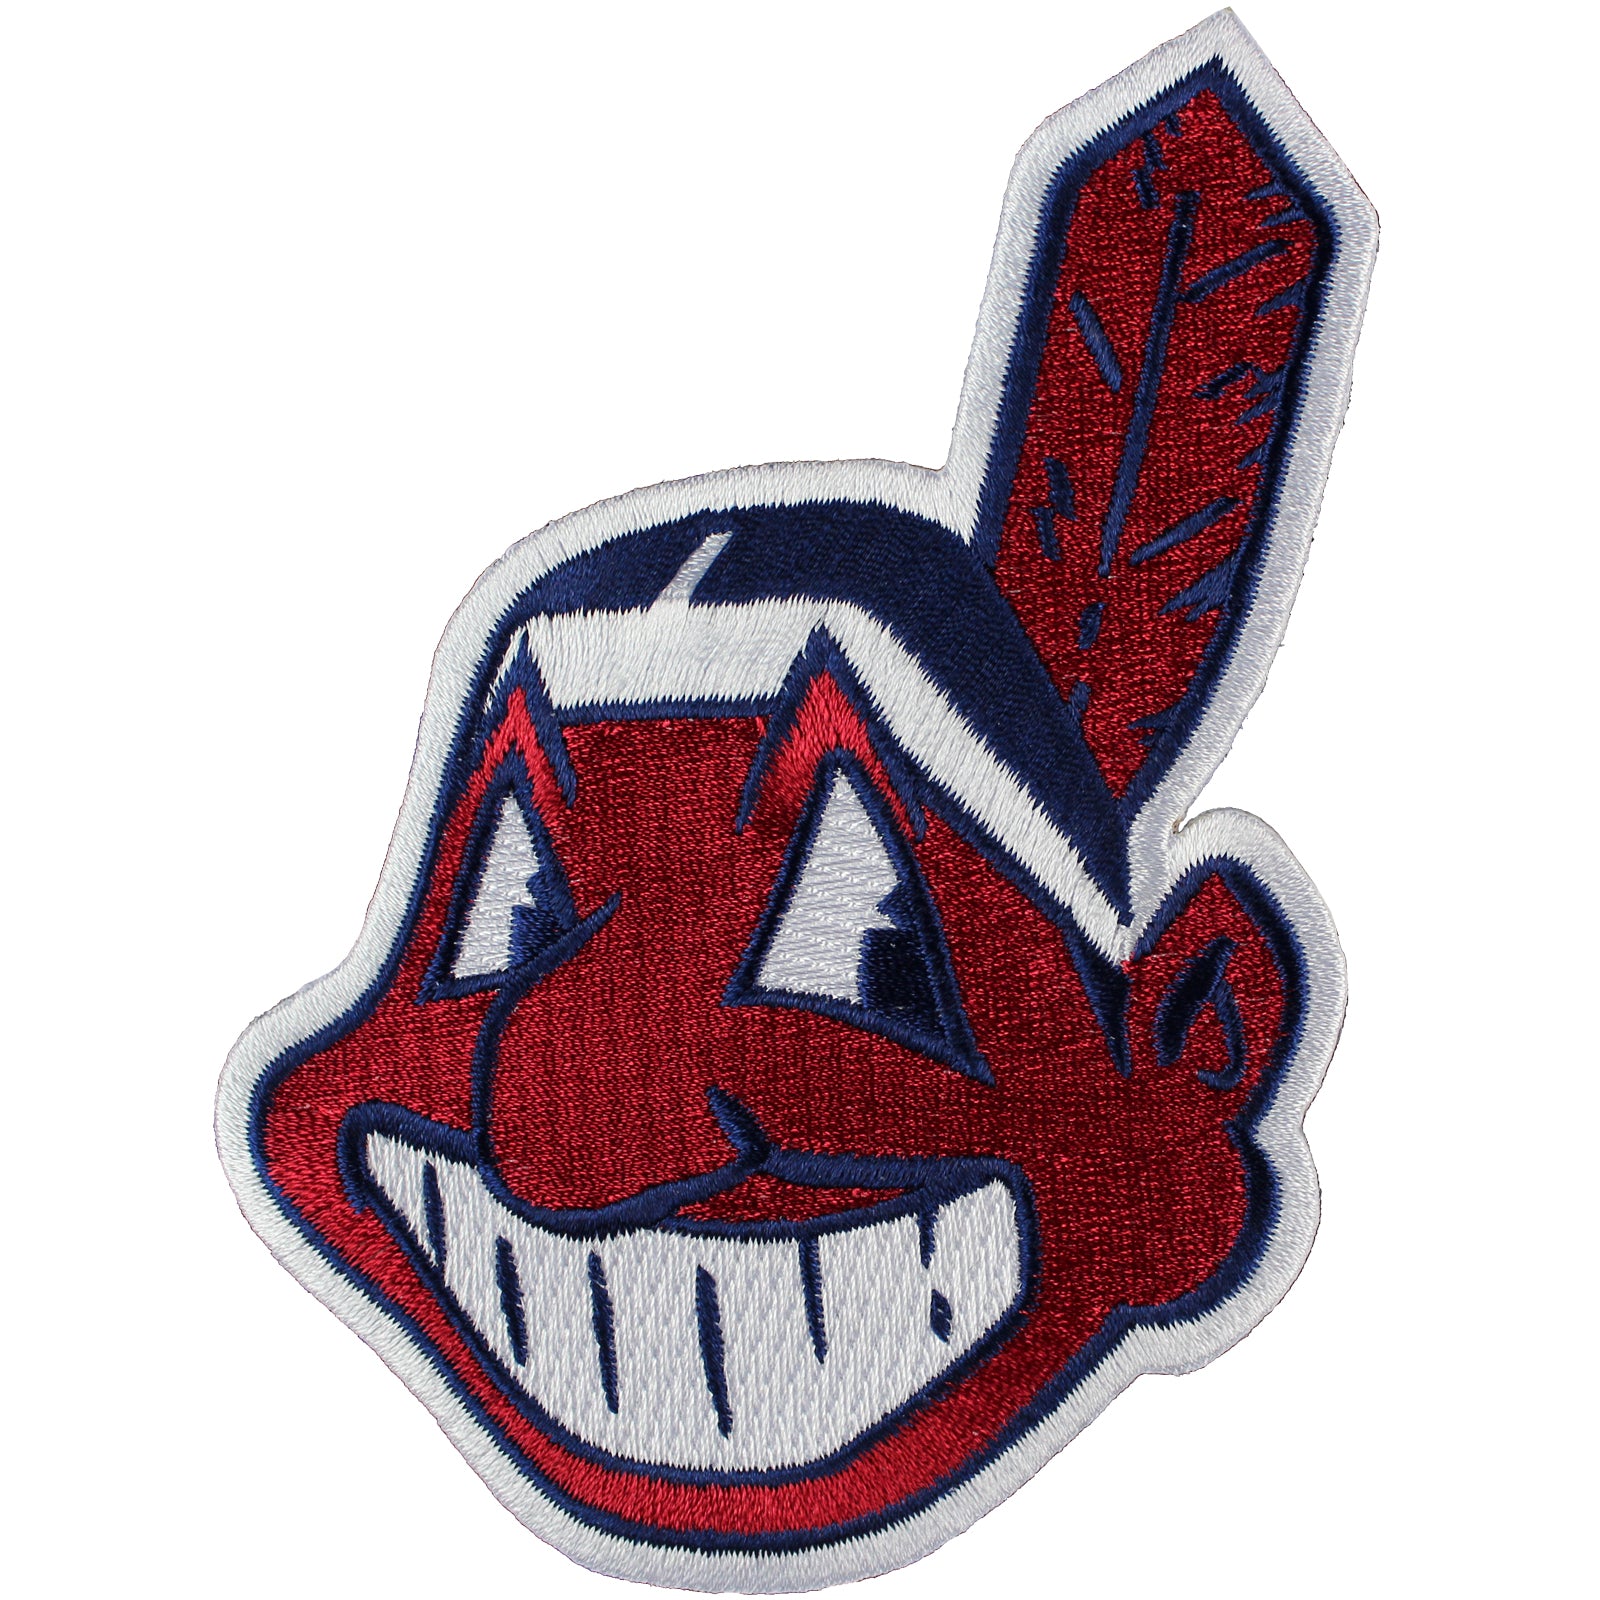 Cleveland Indians Script MLB Jersey Chest Patch